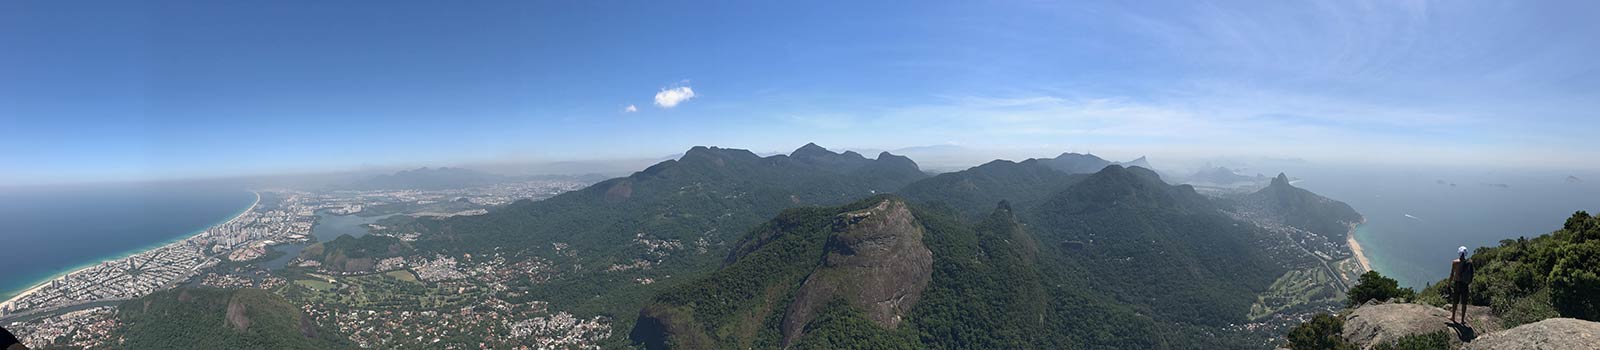 View from the top of the mountain in Gavea, Brazil. Climbing the wrong mountain, the best mistake I've made